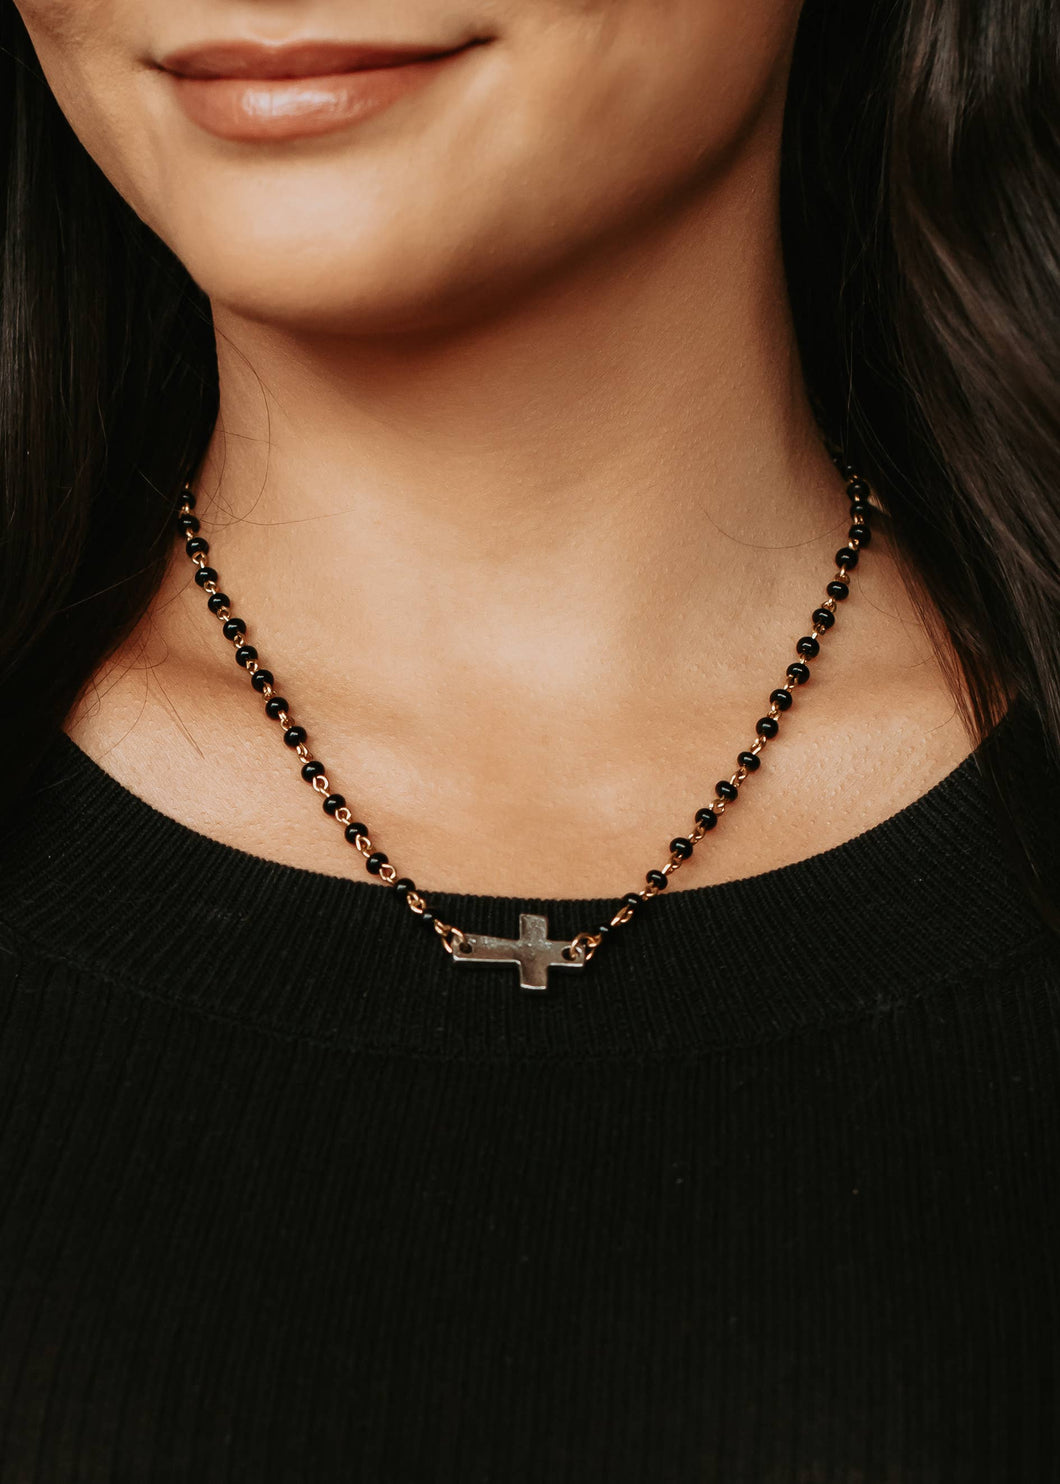 Black Beaded Chain with Silver Cross Pendant